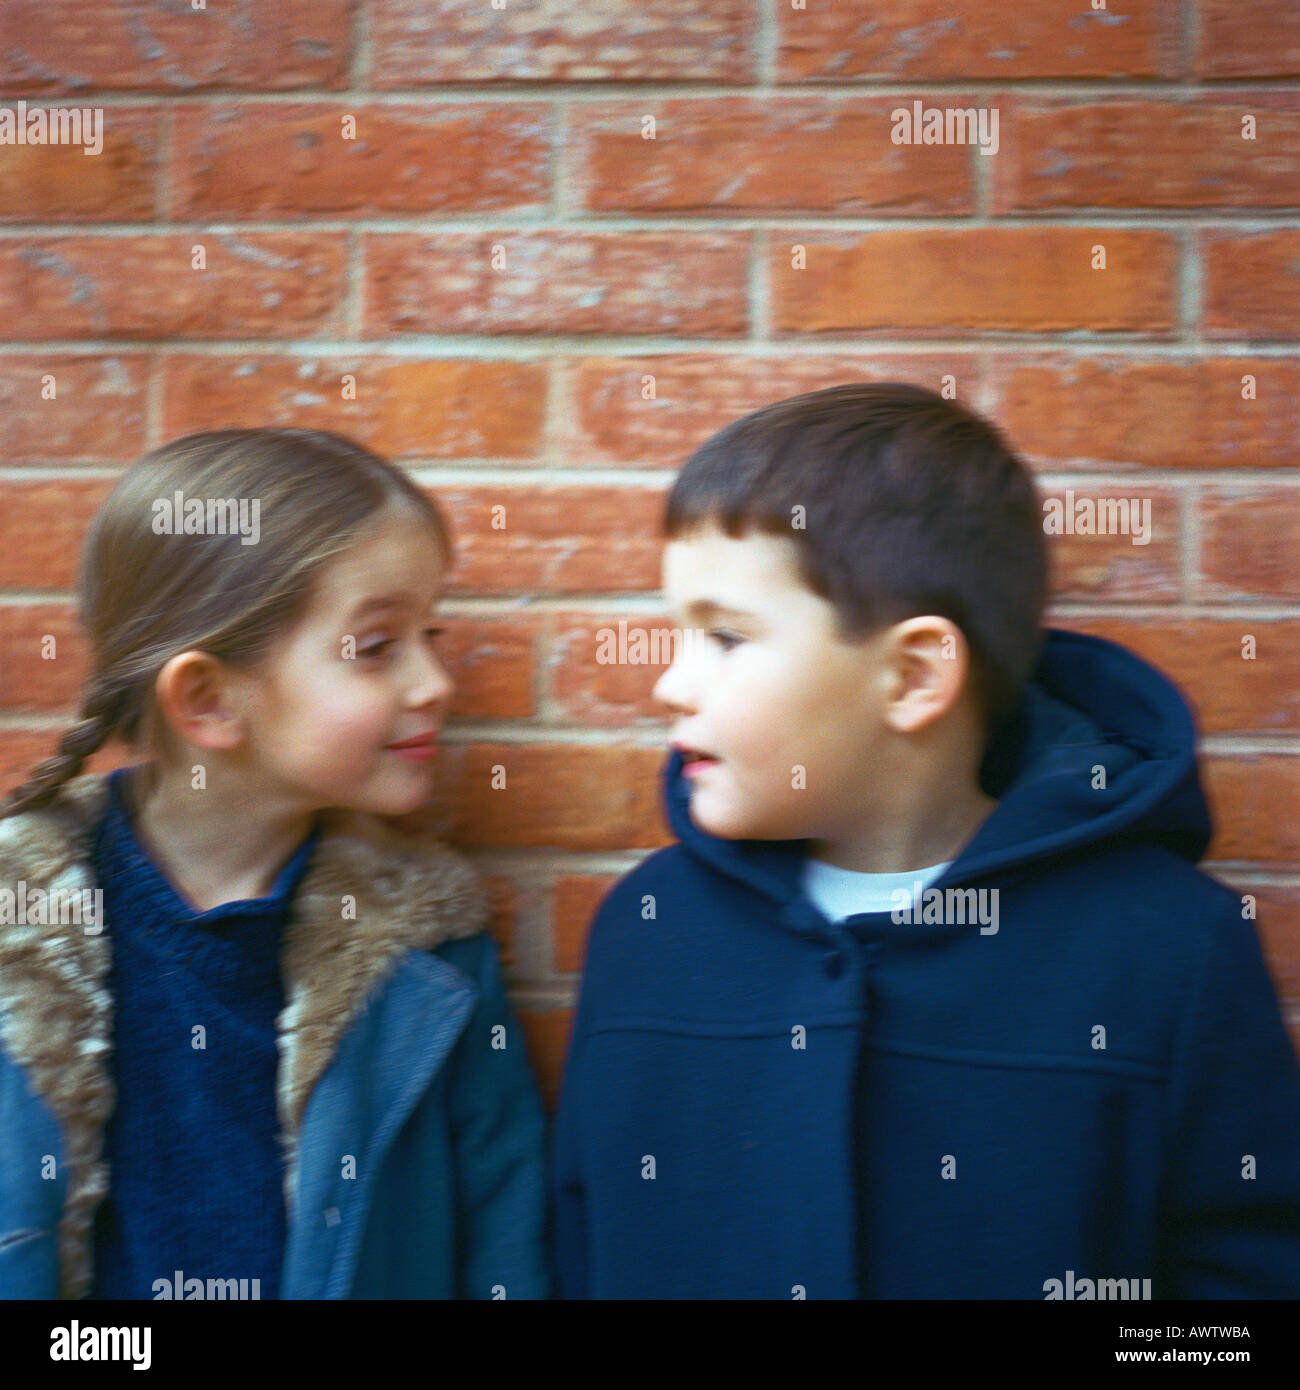 Boy and girl standing in front of brick wall, staring eachother down, blurred Stock Photo